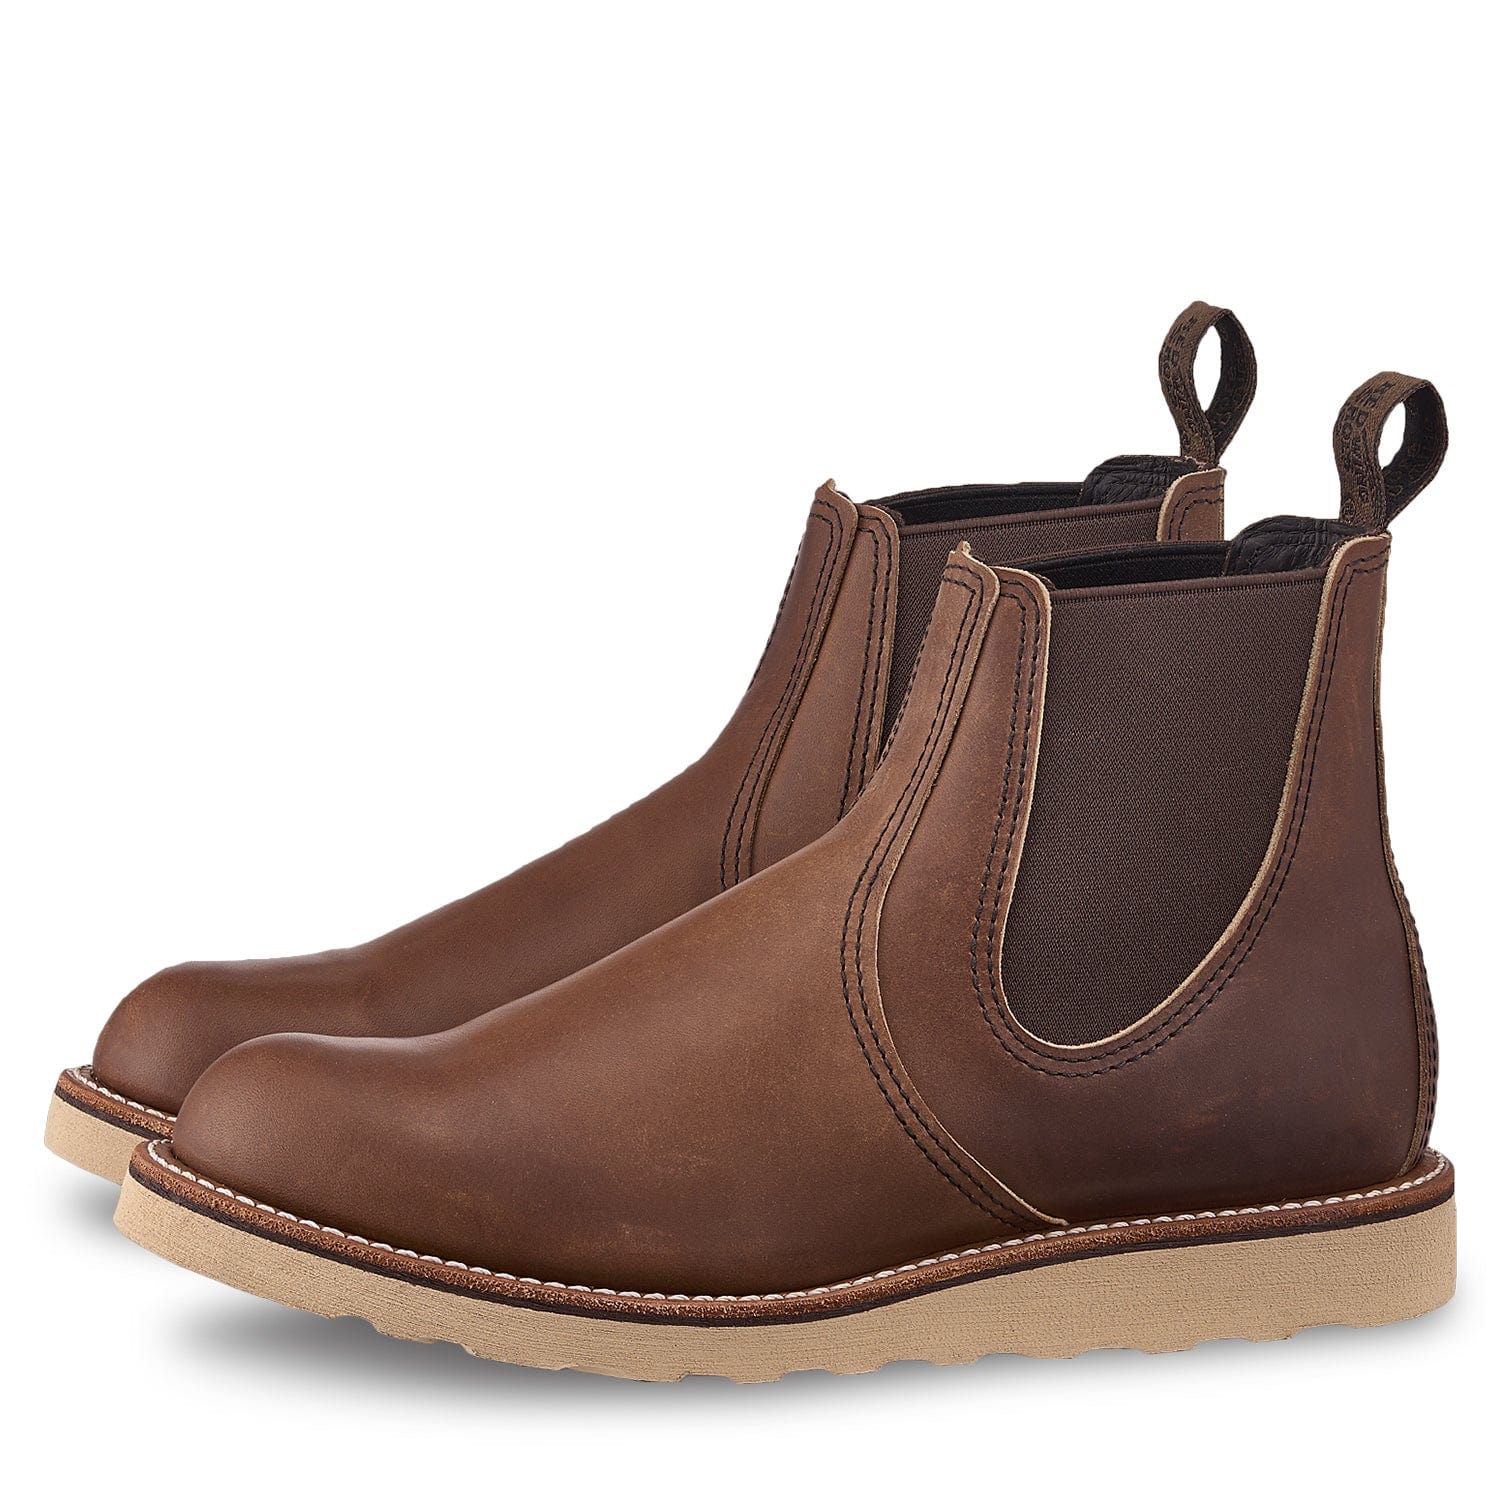 Pastor Syd Betjening mulig 3190 Classic Chelsea Amber Harness – Red Wing